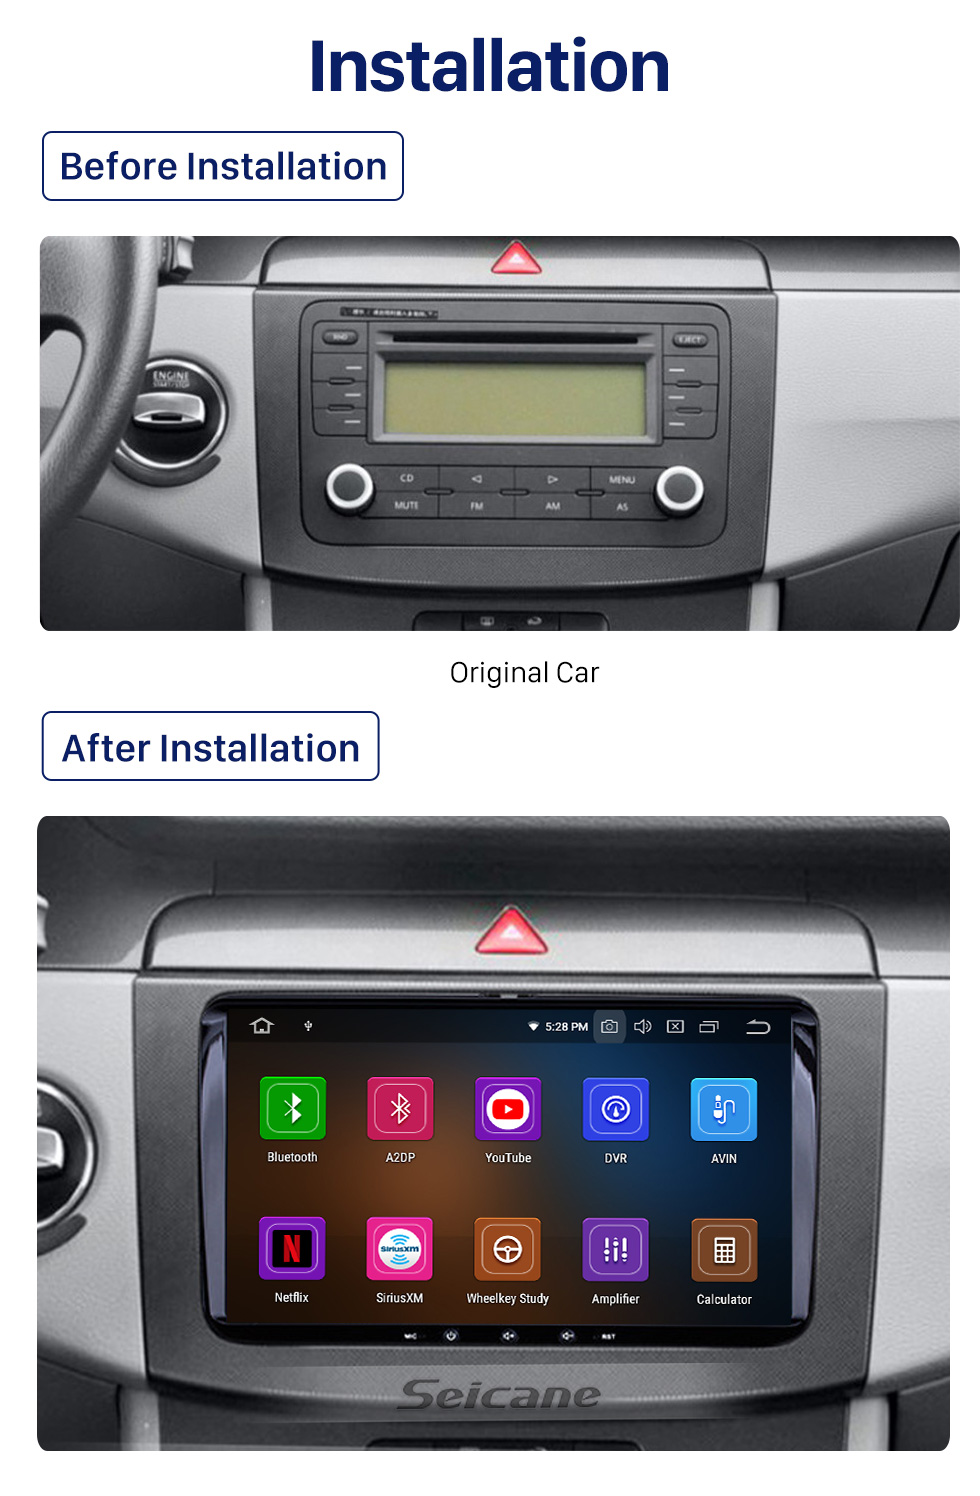 Seicane Aftermarket Android 10.0 GPS DVD Player Car Audio System for VW Volkswagen Universal SKODA Seatwith Mirror Link OBD2 DVR 3G WiFi Radio Backup Camera HD touch Screen Bluetooth